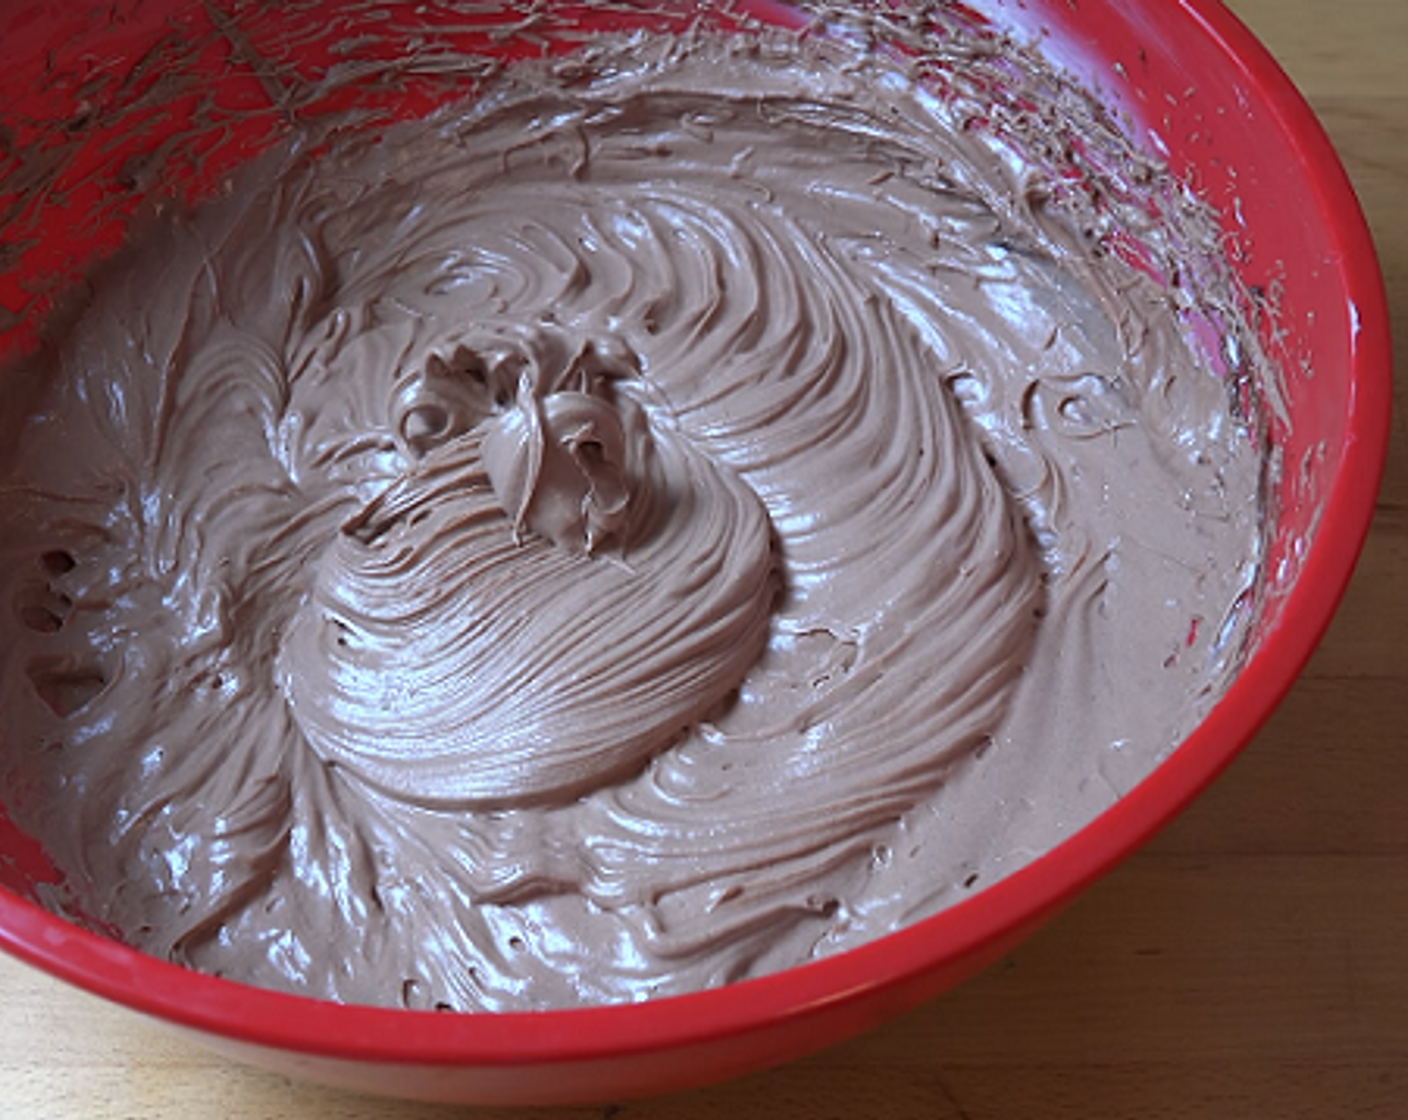 step 4 In a large mixing bowl, add Cream Cheese (2 cups) and Sweetened Condensed Milk (1 1/3 cups). Using an electric hand mixer, beat together. Pour in the melted chocolate and beat again.